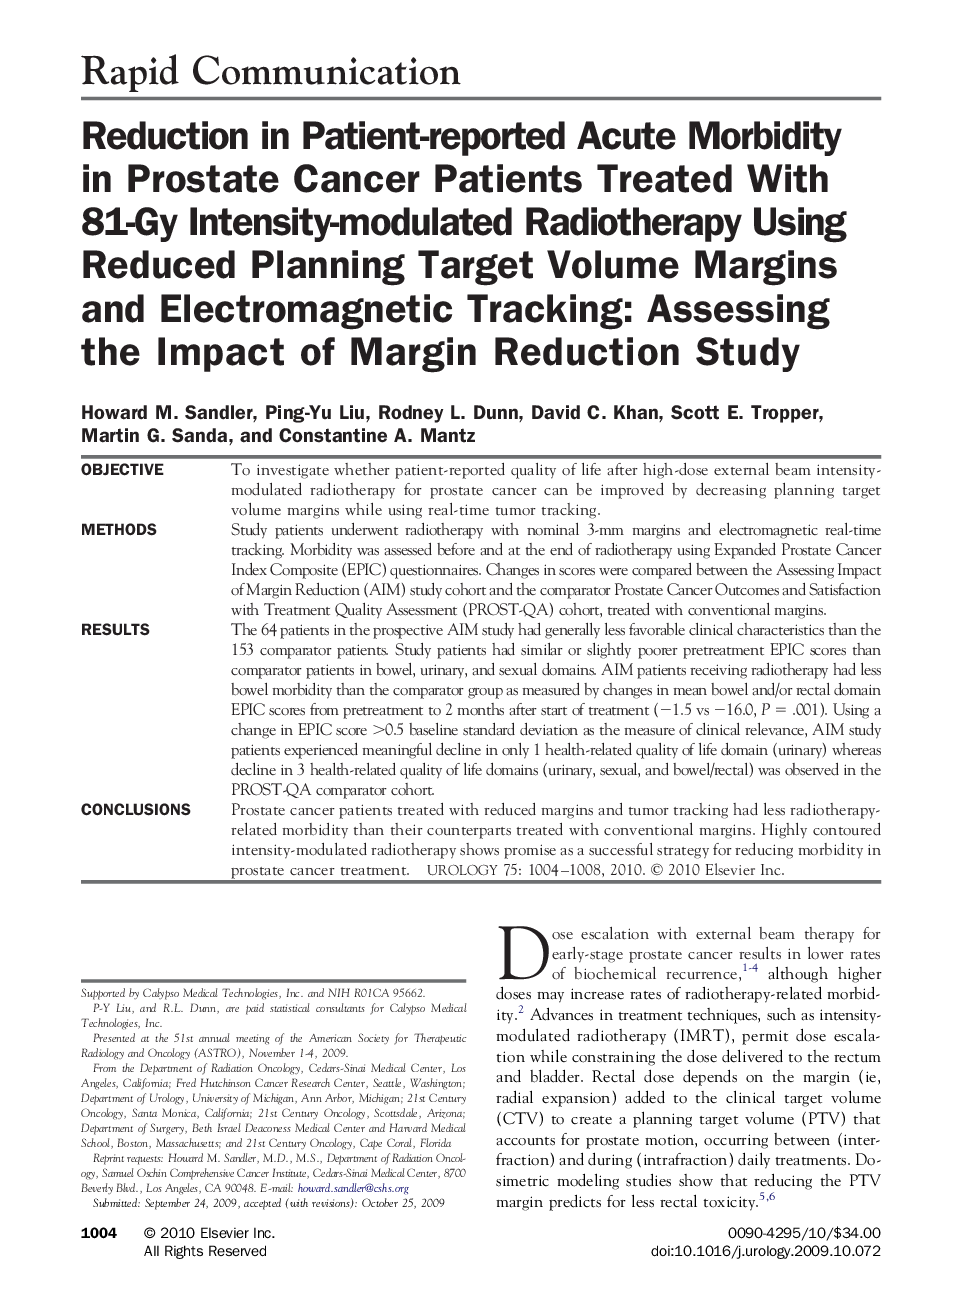 Reduction in Patient-reported Acute Morbidity in Prostate Cancer Patients Treated With 81-Gy Intensity-modulated Radiotherapy Using Reduced Planning Target Volume Margins and Electromagnetic Tracking: Assessing the Impact of Margin Reduction Study 